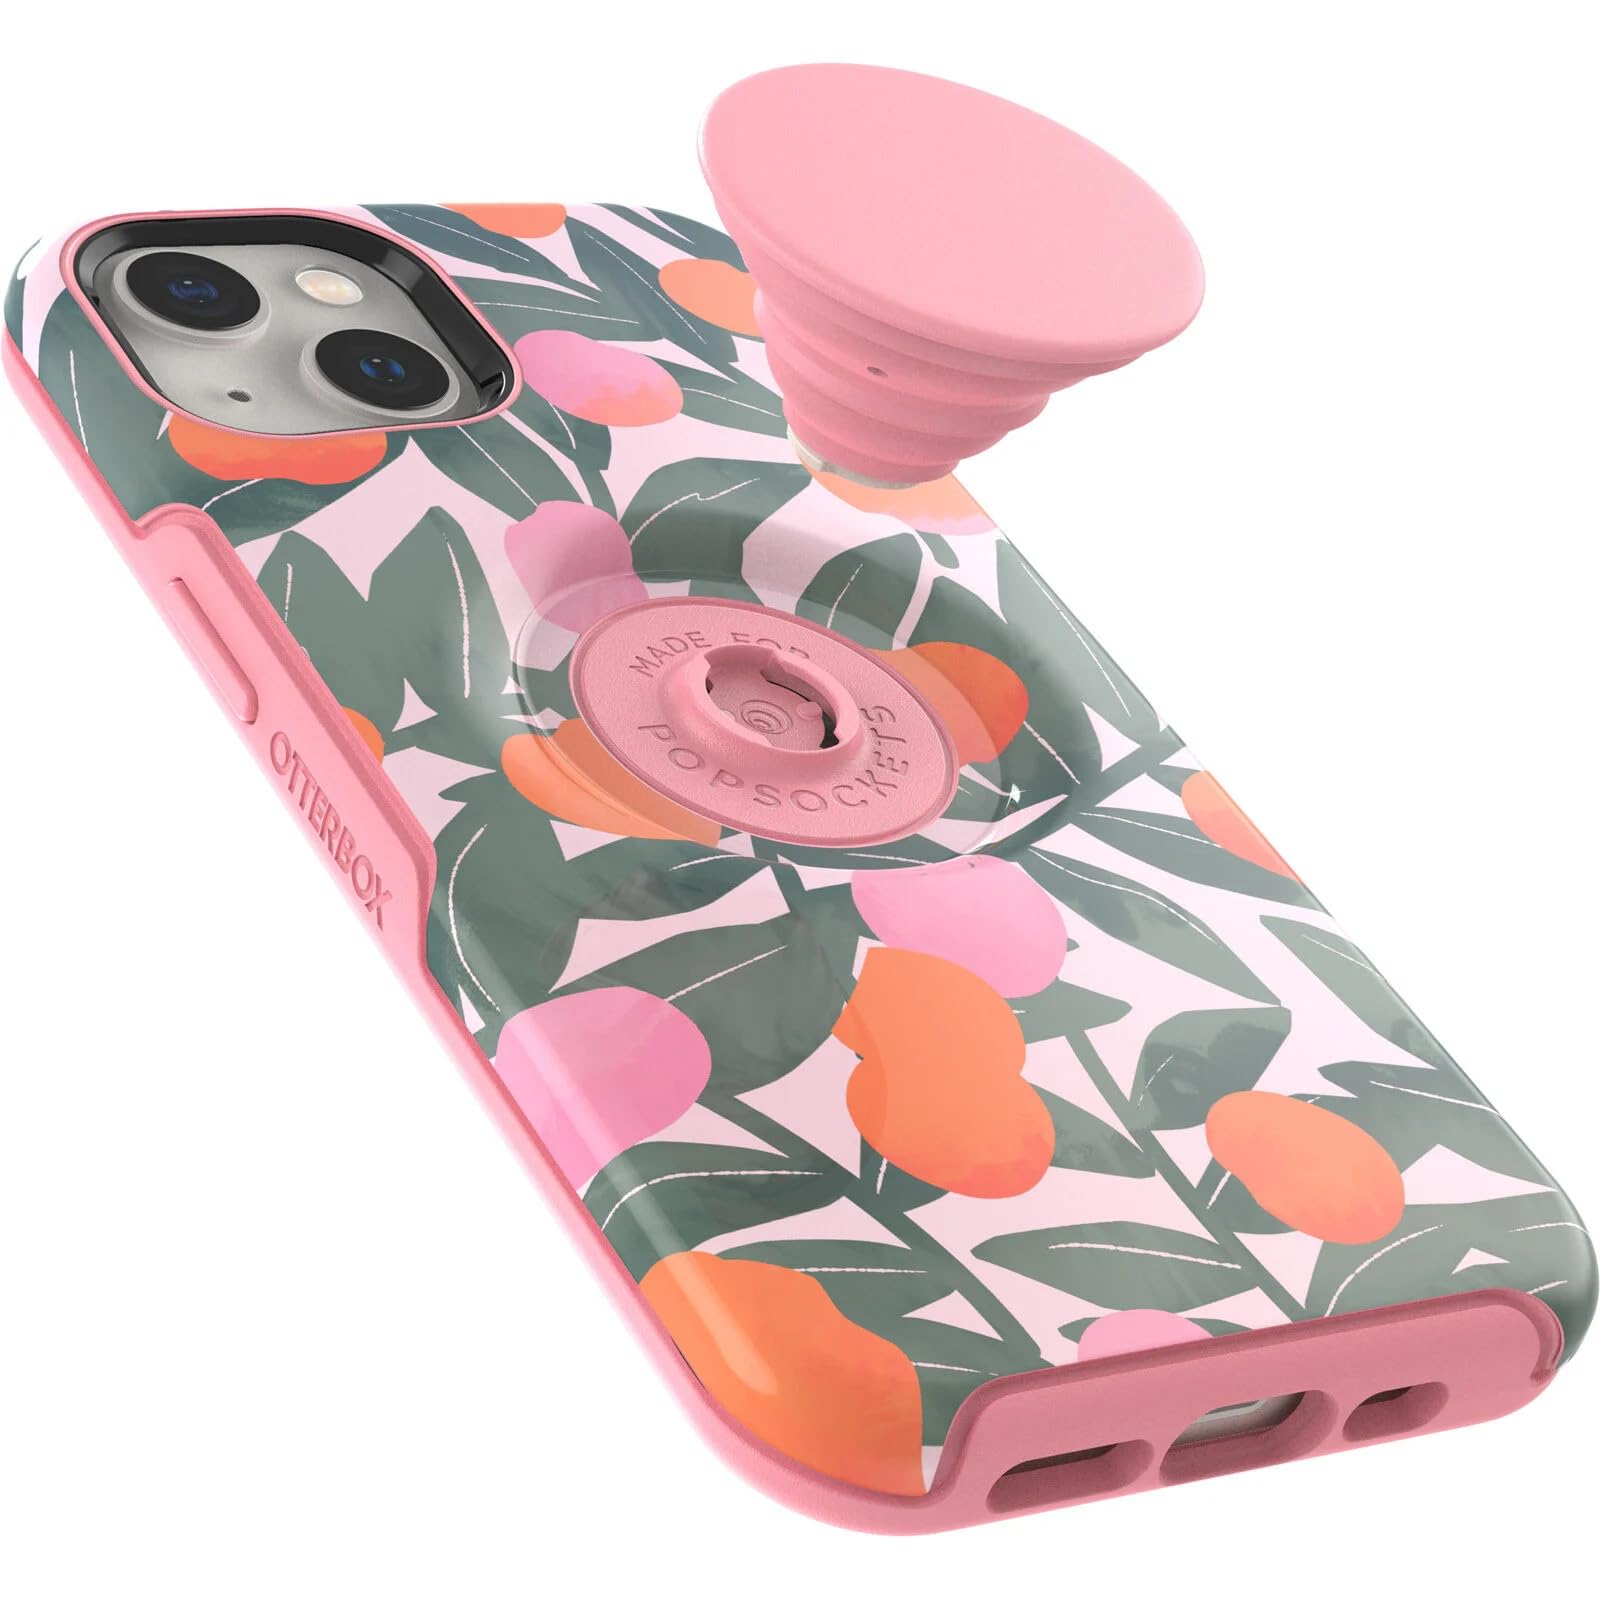 OtterBox + Pop Symmetry Series Case for iPhone 13 (Only) - Non-Retail Packaging - Stay Peachy (Pink Graphic)